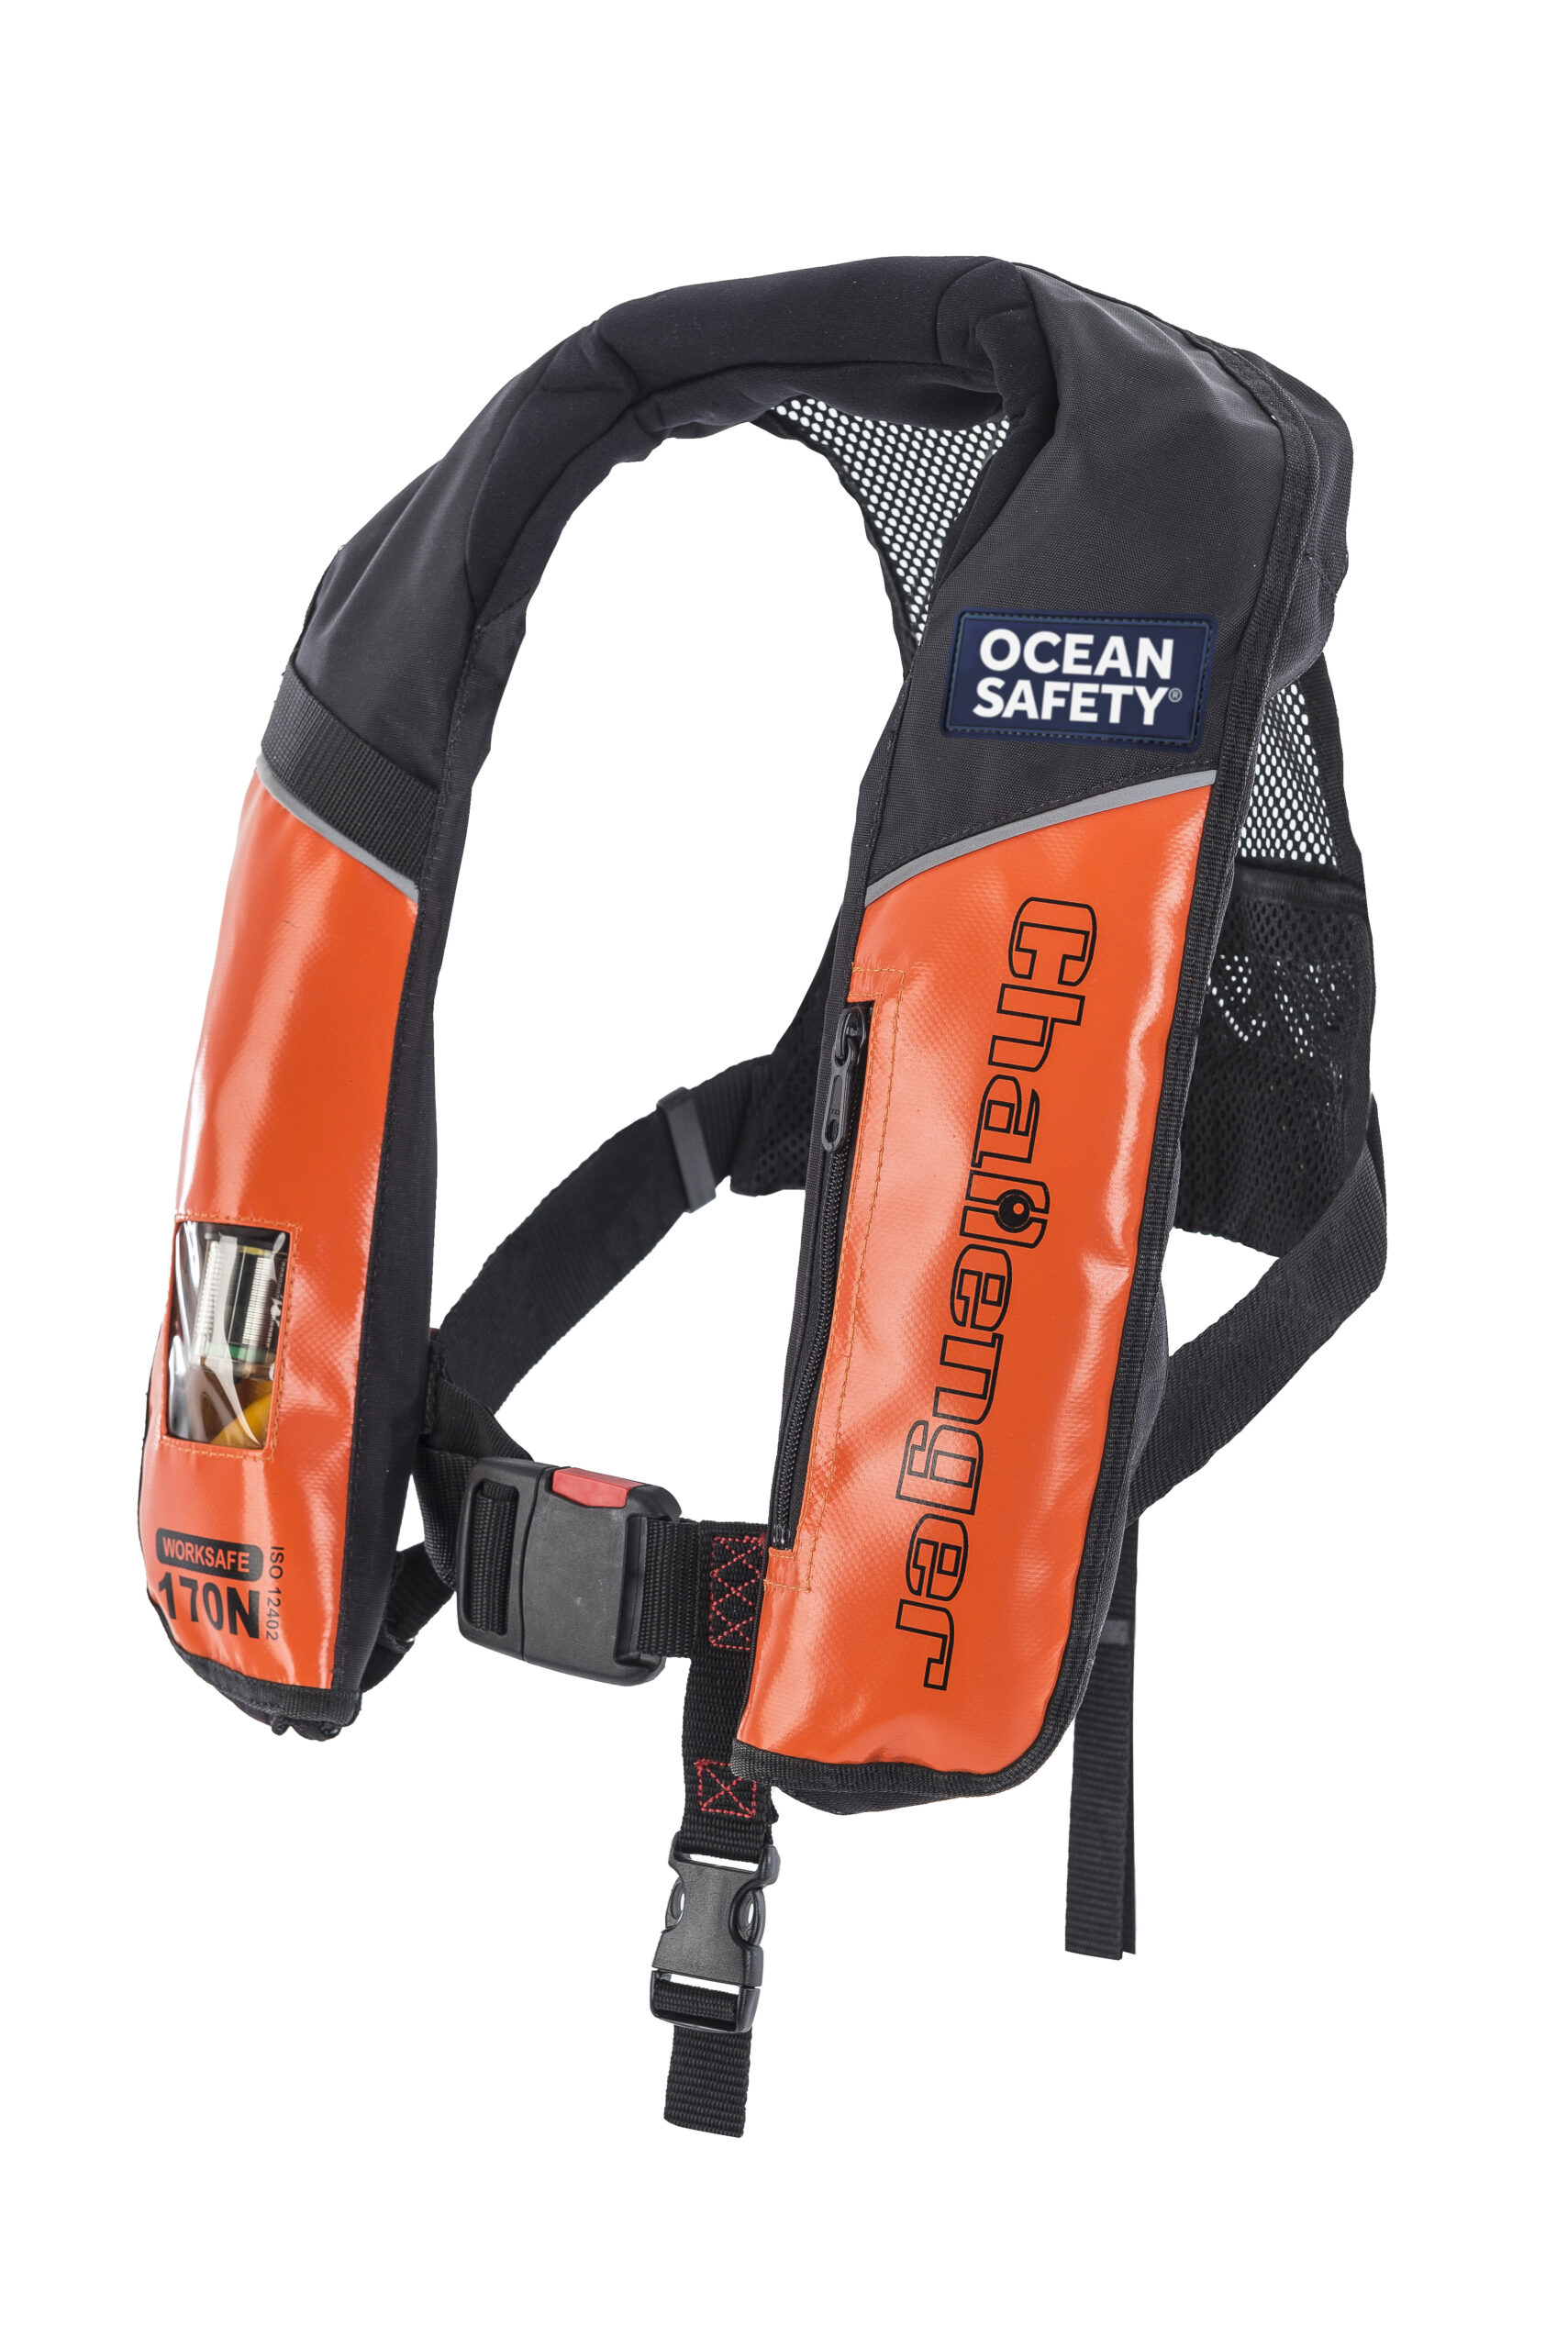 https://www.oceansafety.com/wp-content/uploads/2023/09/Worksafe-Pro-170-wipe-clean-non-harness_high-res-scaled.jpg